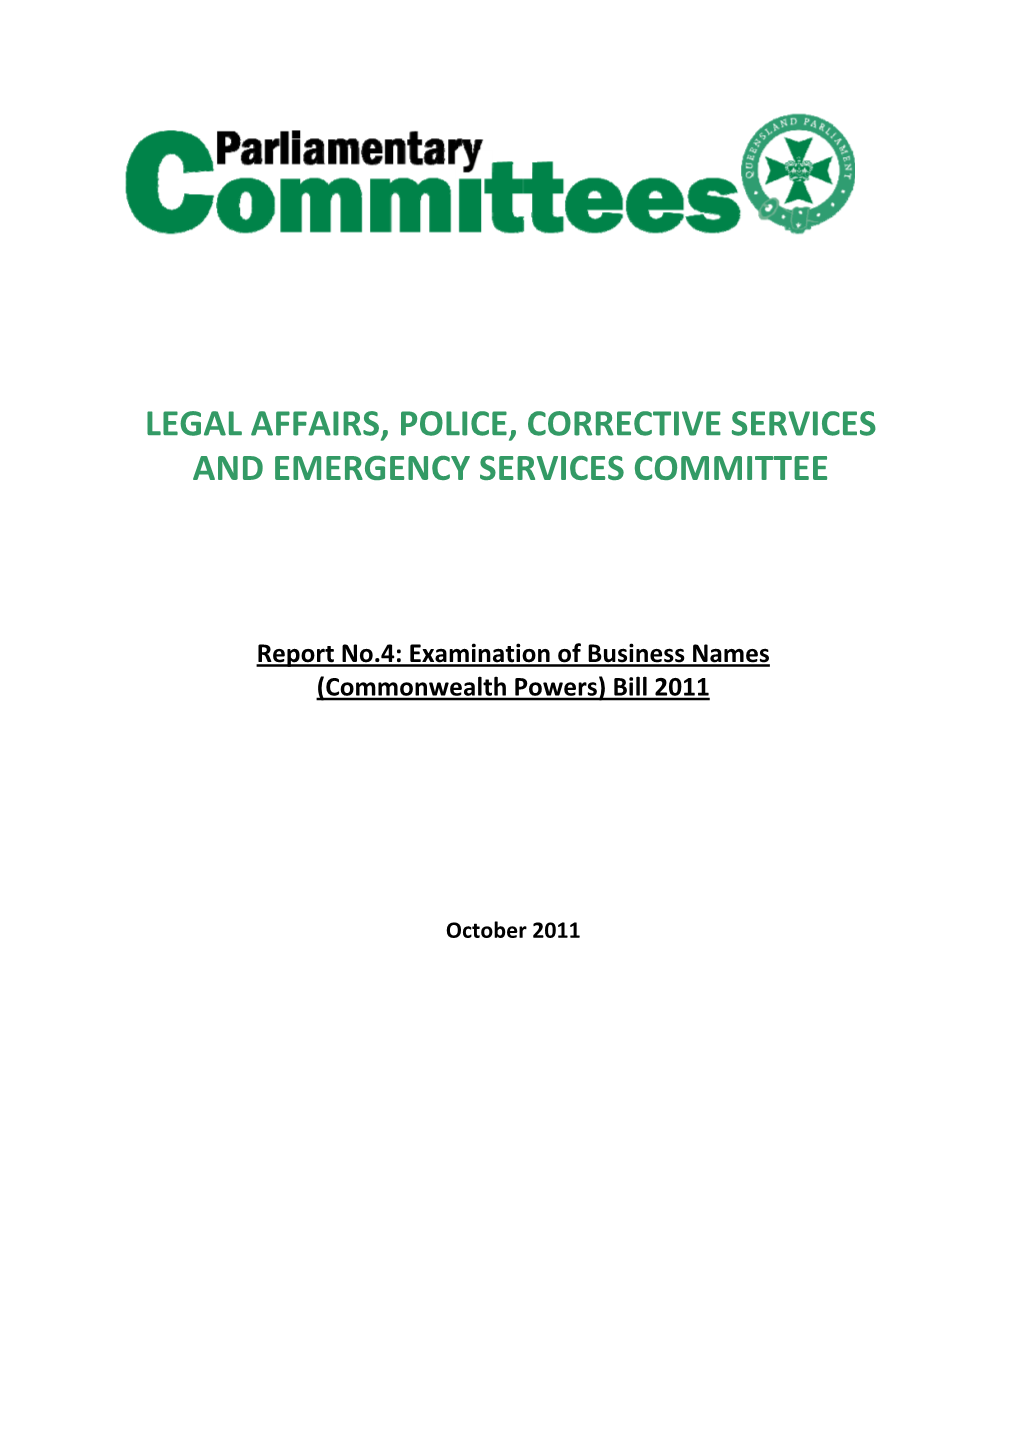 Legal Affairs, Police, Corrective Services and Emergency Services Committee